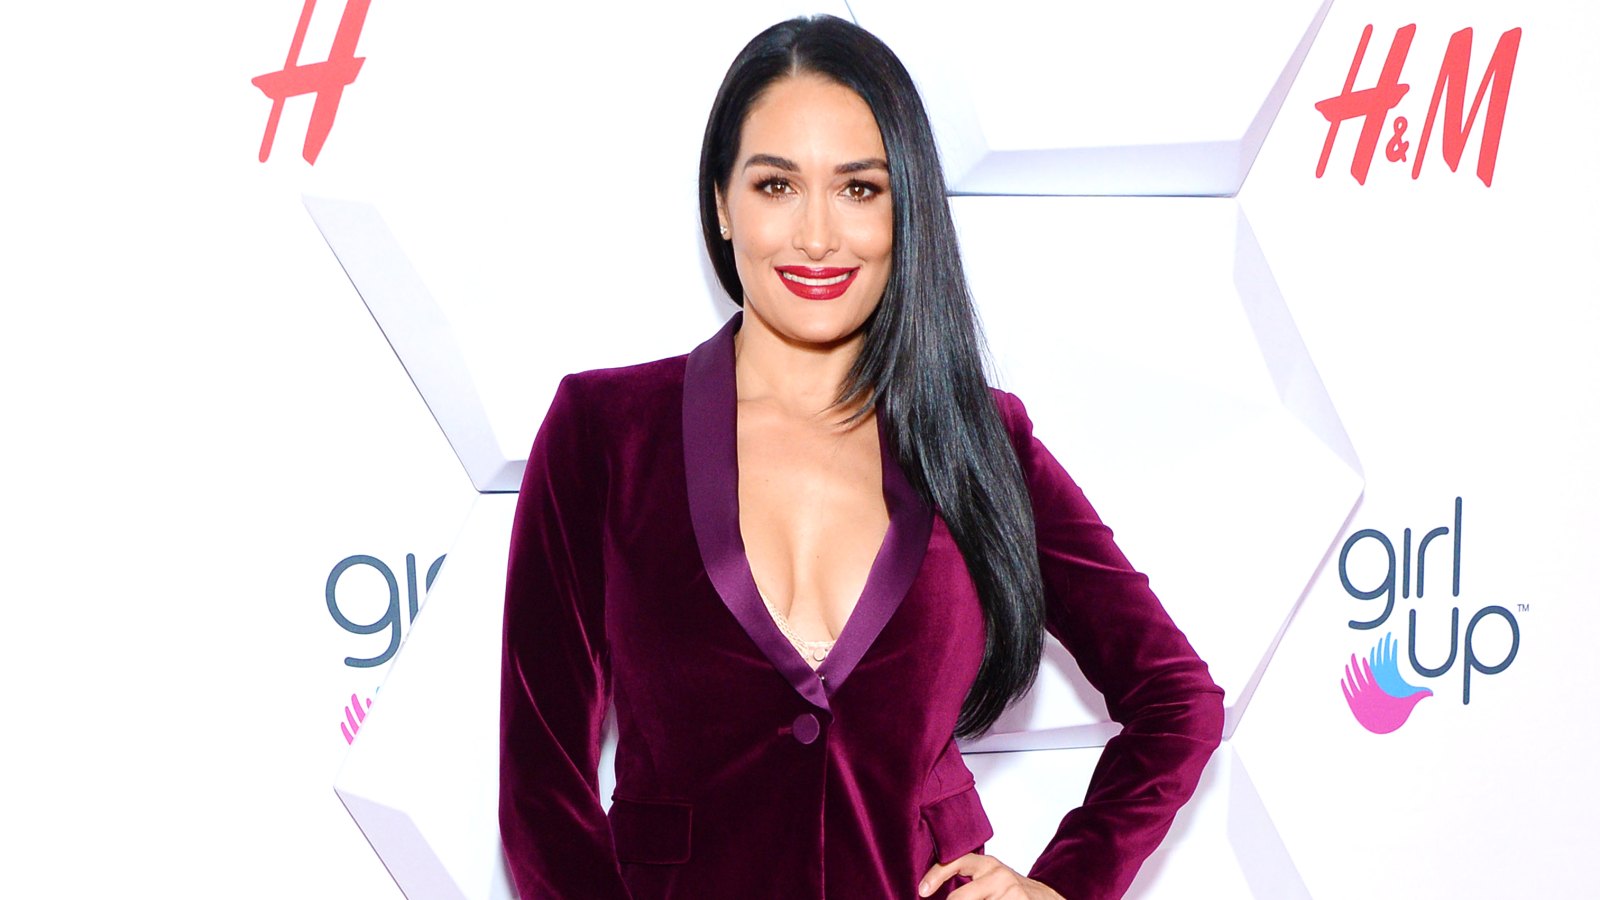 Photos: WWE Star Nikki Bella Continues To Show Off Following New